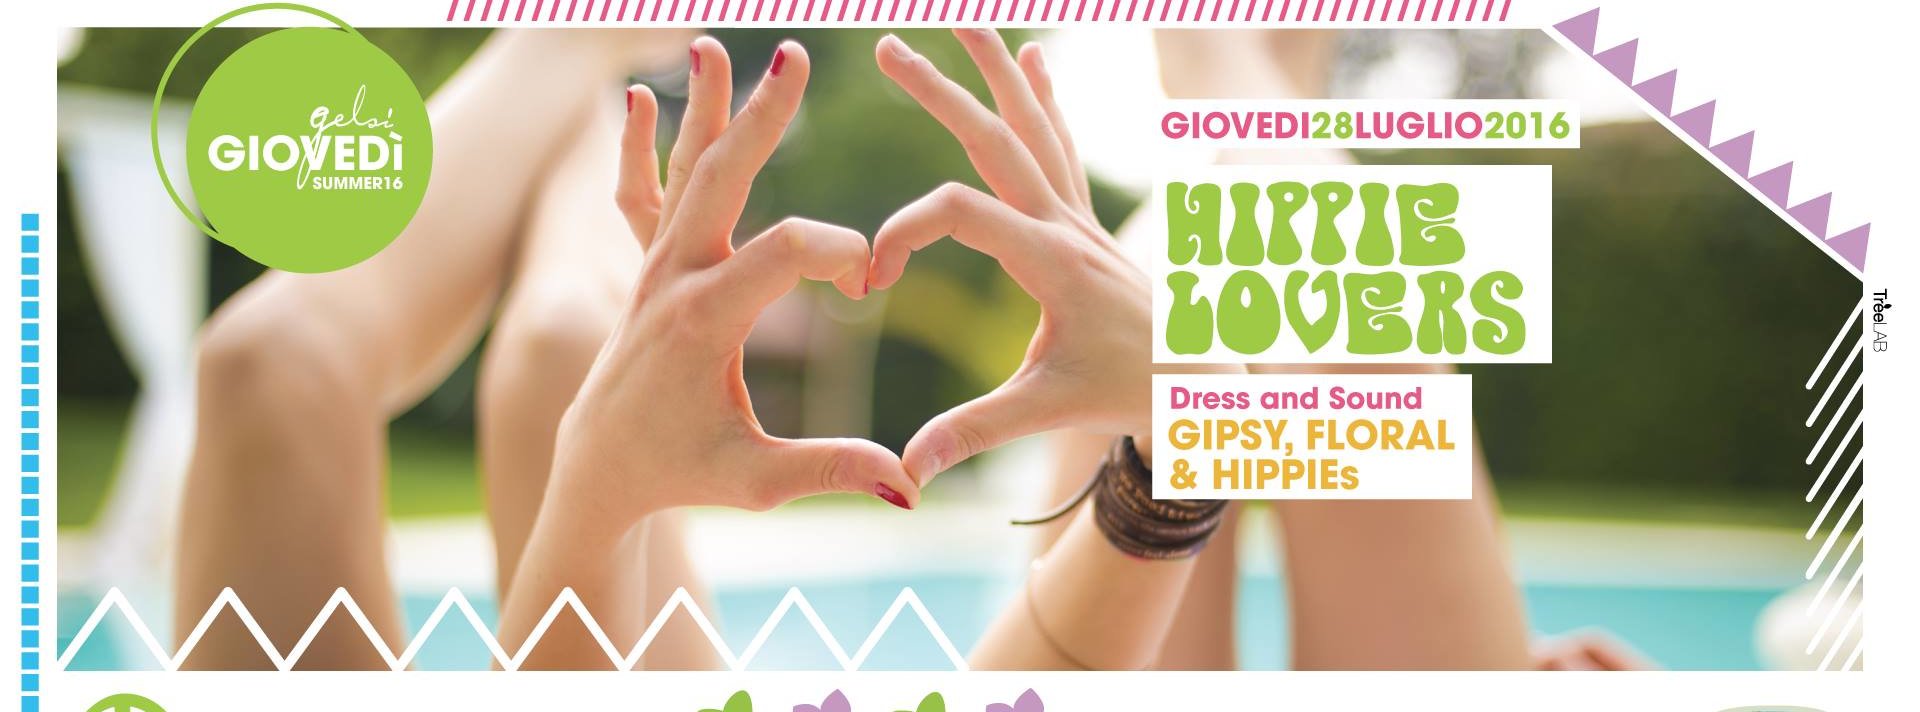 giovedi gelsi hippies lovers